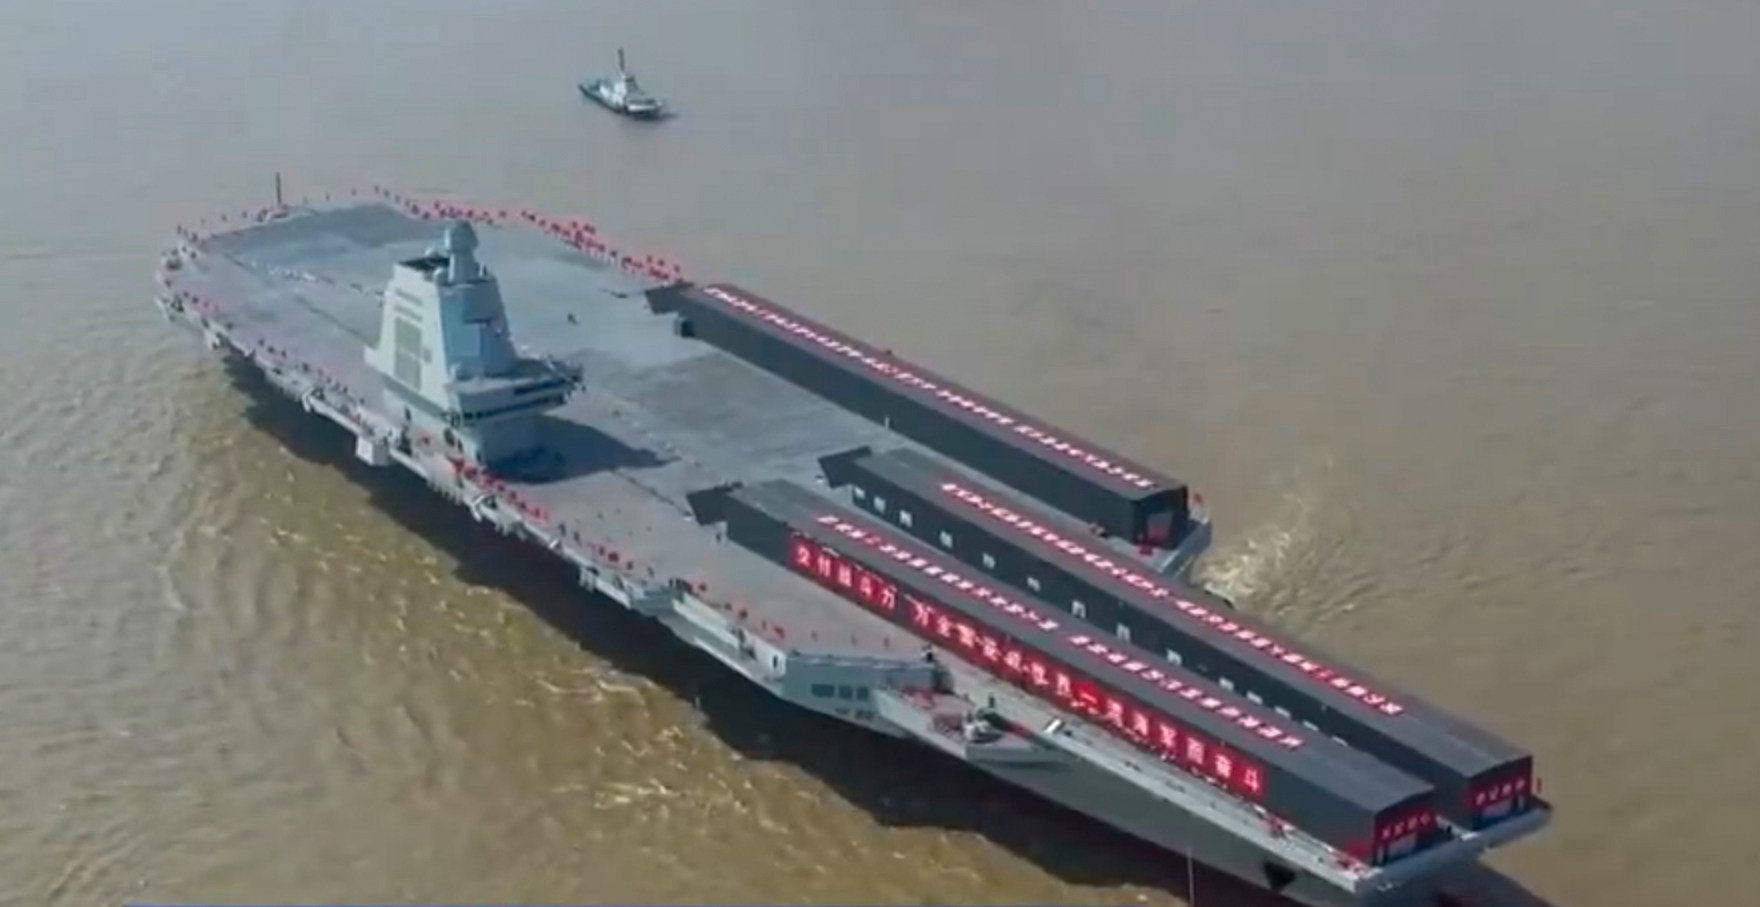 The Fujian is China’s third aircraft carrier. Photo: CCTV